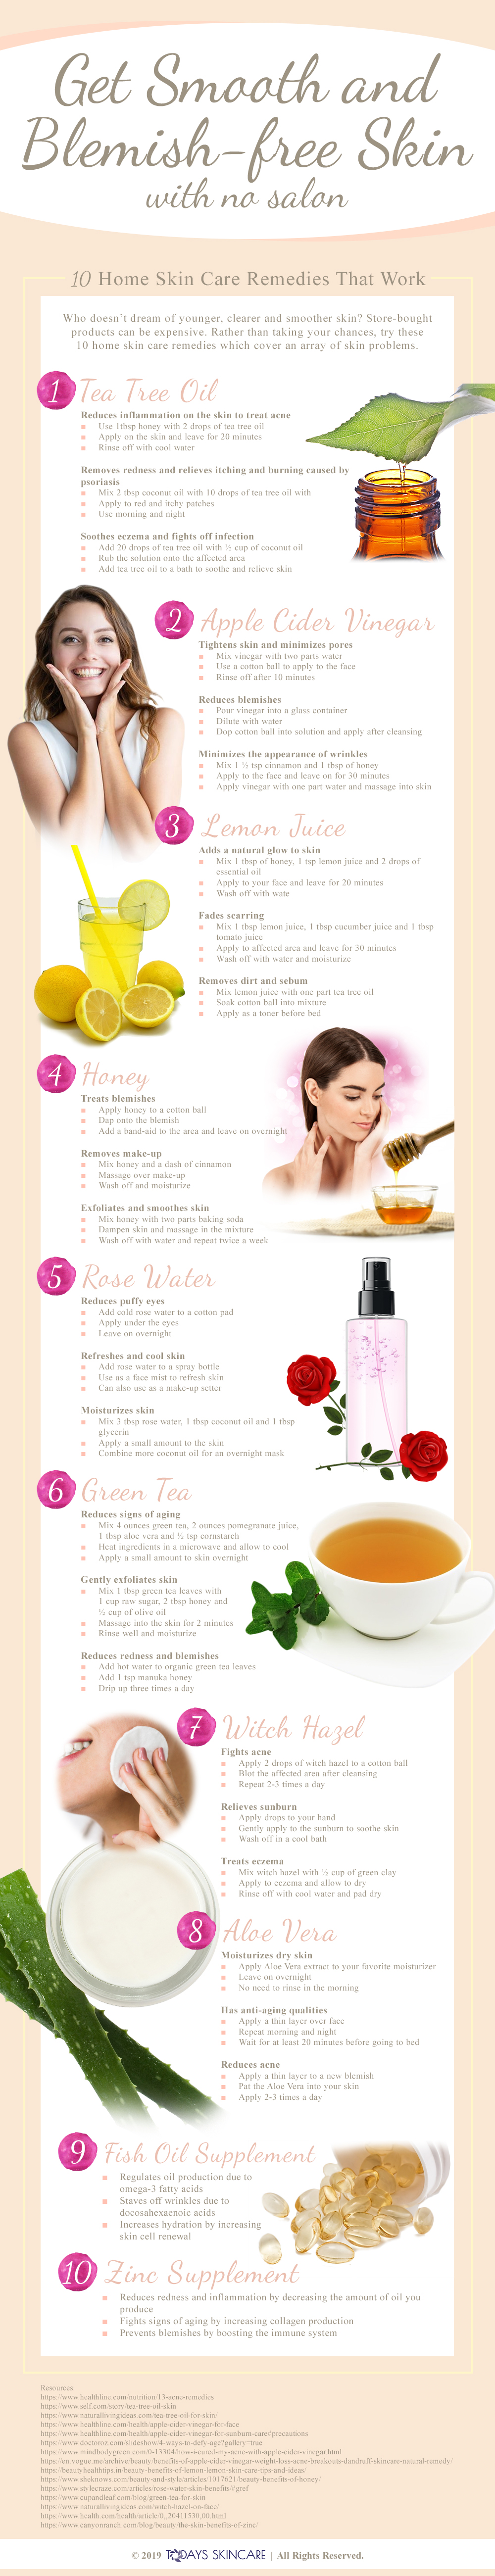 Top 10 Home Skin Care Remedies That Work